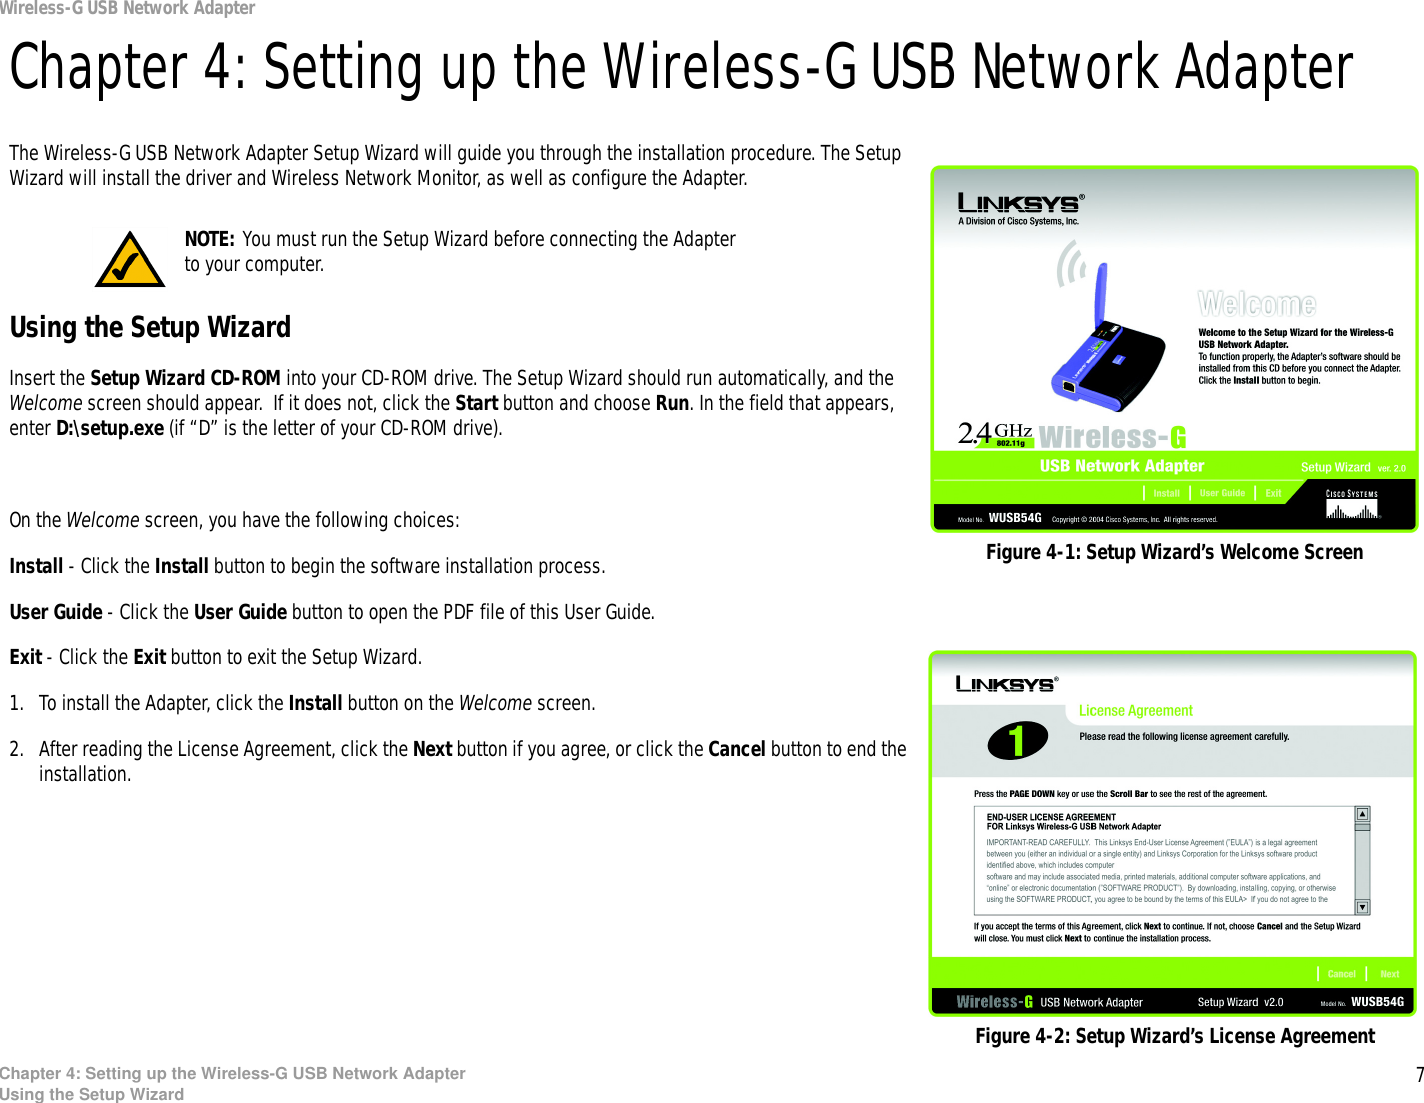 7Chapter 4: Setting up the Wireless-G USB Network AdapterUsing the Setup WizardWireless-G USB Network AdapterChapter 4: Setting up the Wireless-G USB Network AdapterThe Wireless-G USB Network Adapter Setup Wizard will guide you through the installation procedure. The Setup Wizard will install the driver and Wireless Network Monitor, as well as configure the Adapter.Using the Setup WizardInsert the Setup Wizard CD-ROM into your CD-ROM drive. The Setup Wizard should run automatically, and the Welcome screen should appear.  If it does not, click the Start button and choose Run. In the field that appears, enter D:\setup.exe (if “D” is the letter of your CD-ROM drive). On the Welcome screen, you have the following choices:Install - Click the Install button to begin the software installation process. User Guide - Click the User Guide button to open the PDF file of this User Guide. Exit - Click the Exit button to exit the Setup Wizard.1. To install the Adapter, click the Install button on the Welcome screen.2. After reading the License Agreement, click the Next button if you agree, or click the Cancel button to end the installation.Figure 4-1: Setup Wizard’s Welcome ScreenFigure 4-2: Setup Wizard’s License AgreementNOTE: You must run the Setup Wizard before connecting the Adapter to your computer.